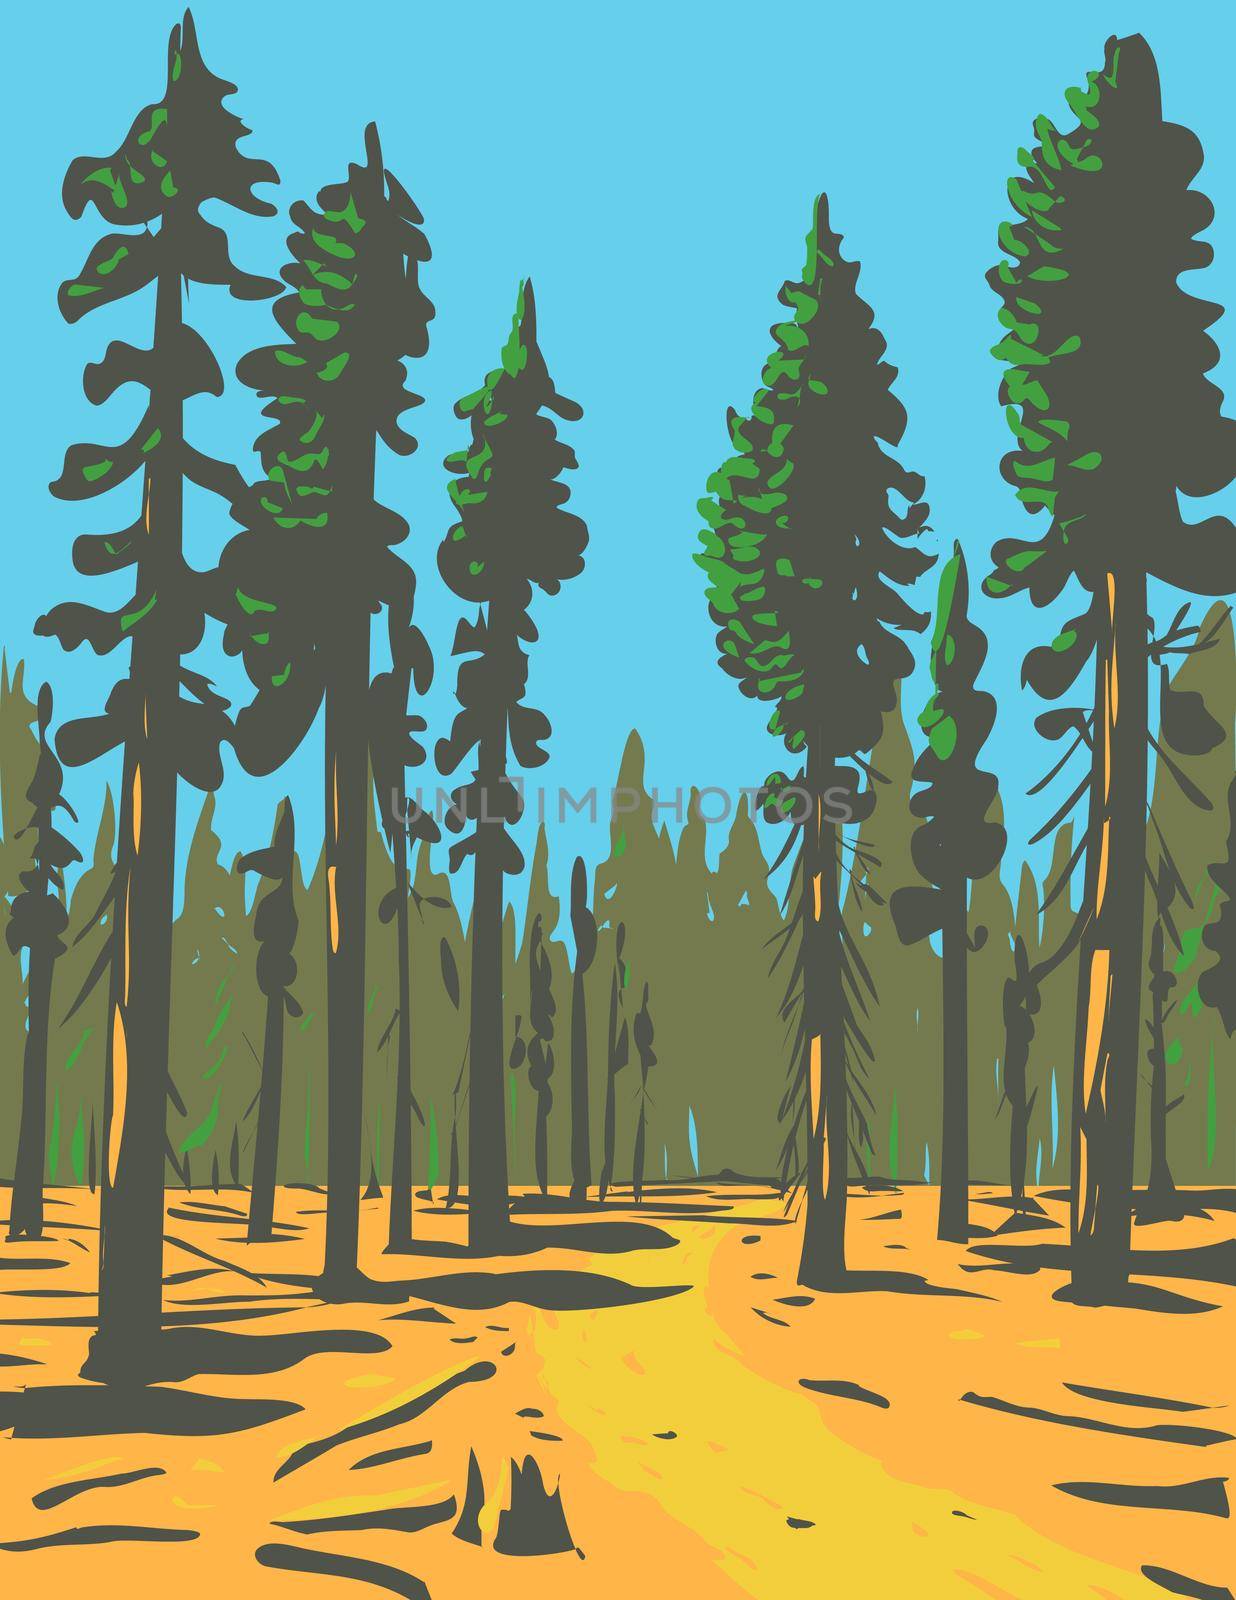 Giant Sequoias Growing in the General Grant Trail and Grove Section of the Greater Kings Canyon National Park Located in California WPA Poster Art by patrimonio